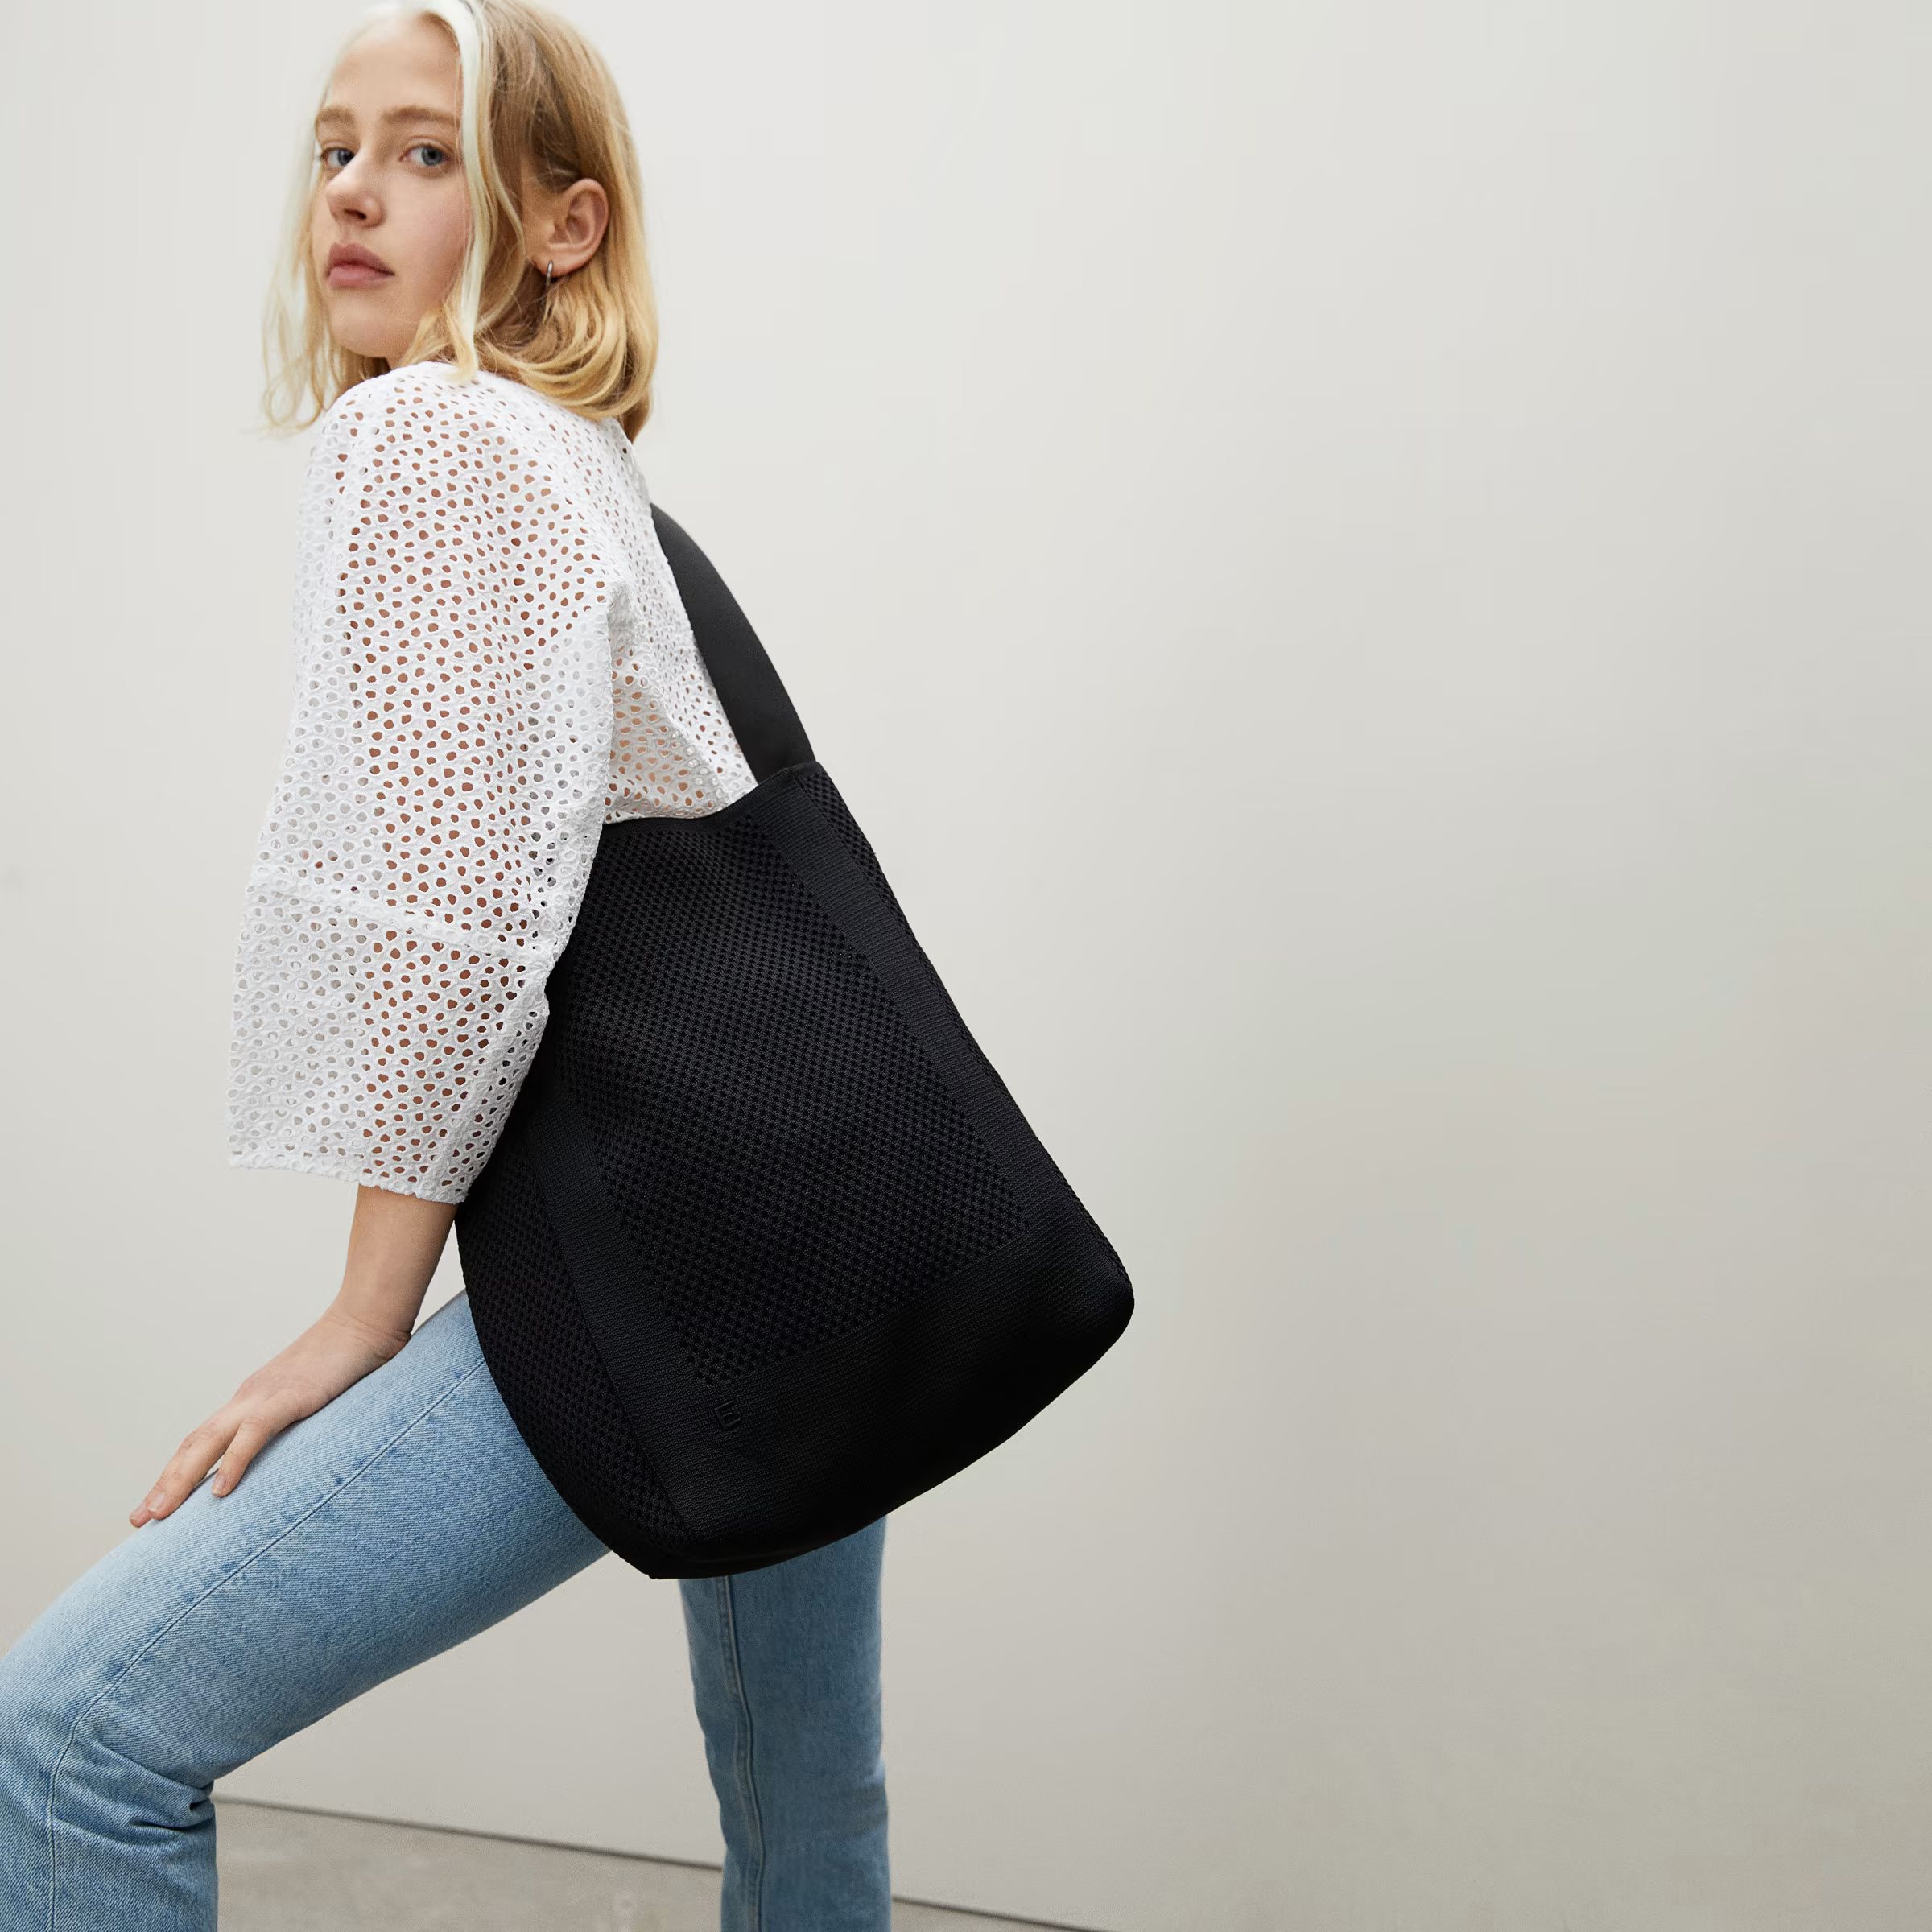 The Do-It-All Tote | Everlane